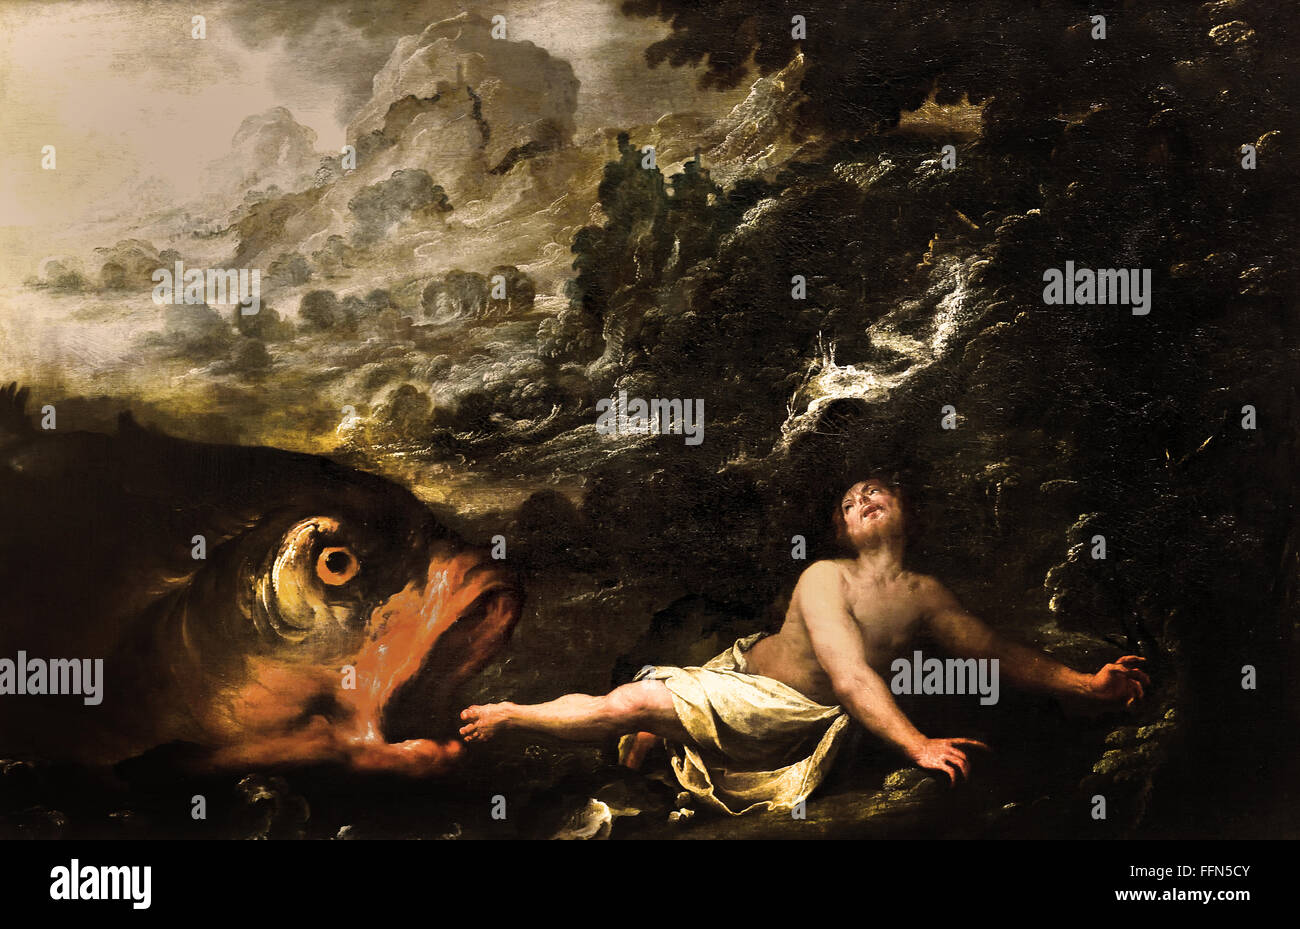 Jonah and the Whale by Louis Brandin ( 1575-1635 France French painter ) Jonah - Jonas prophet northern kingdom Israel 8th century BC famous for being swallowed by a fish or a whale ) Stock Photo